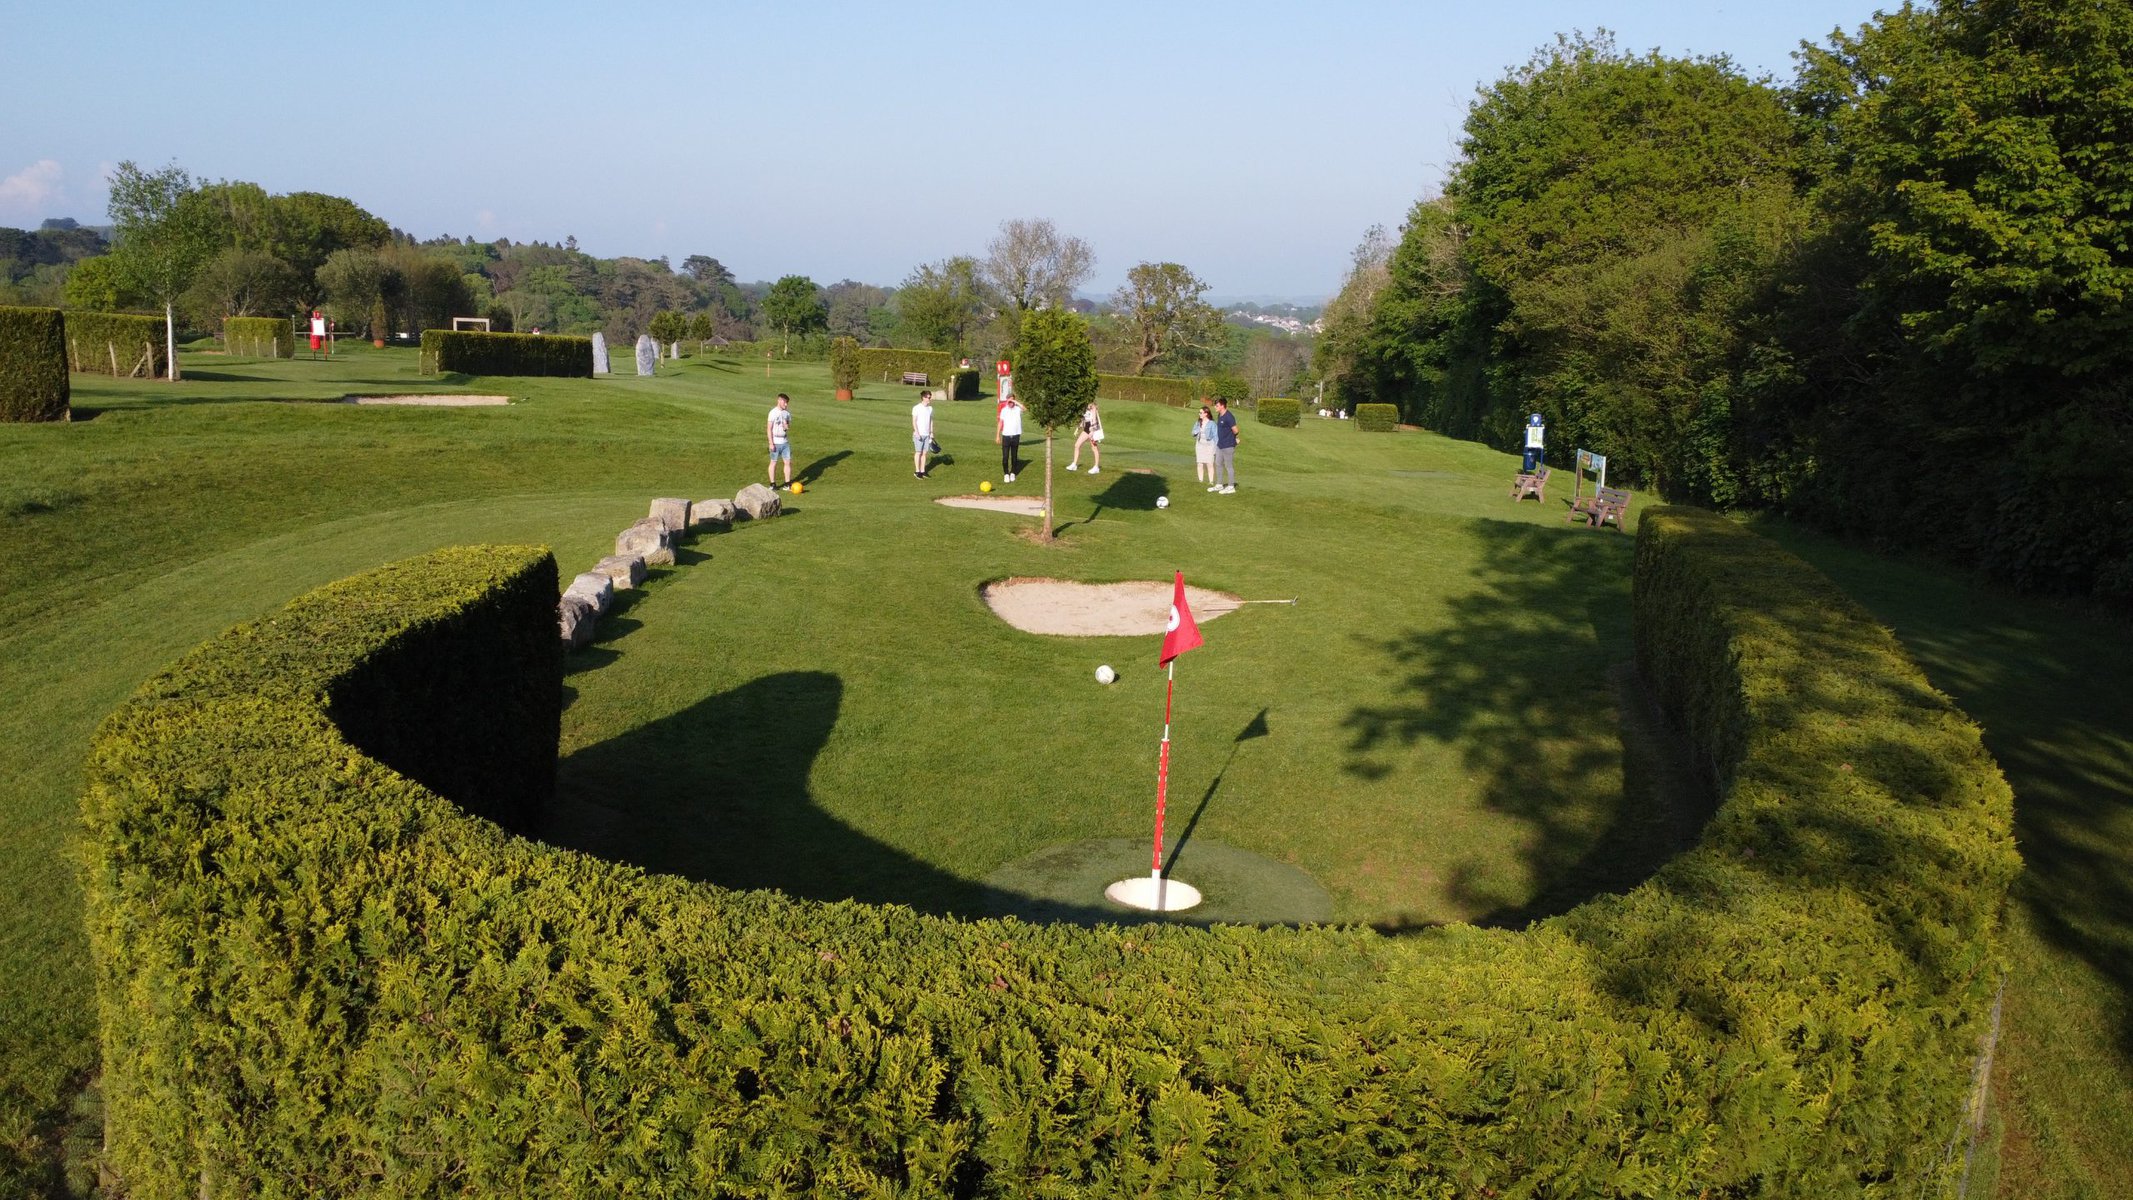 Things to do in Cornwall - Play FootballGolf on the parkland course at Cornwall Football Golf Park